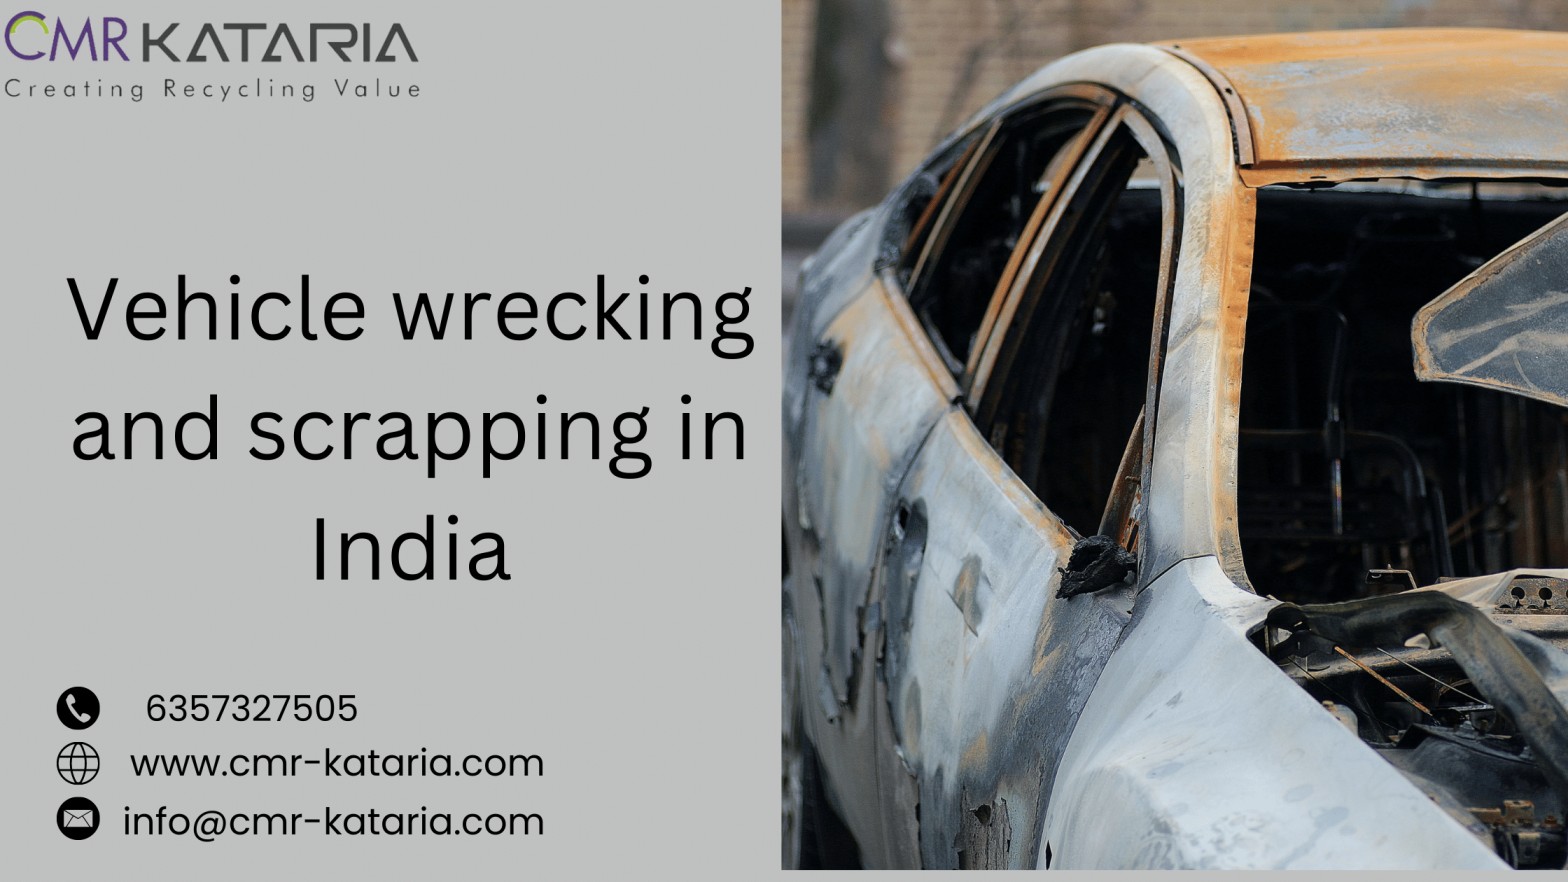 Vehicle Wrecking and Scrapping In India